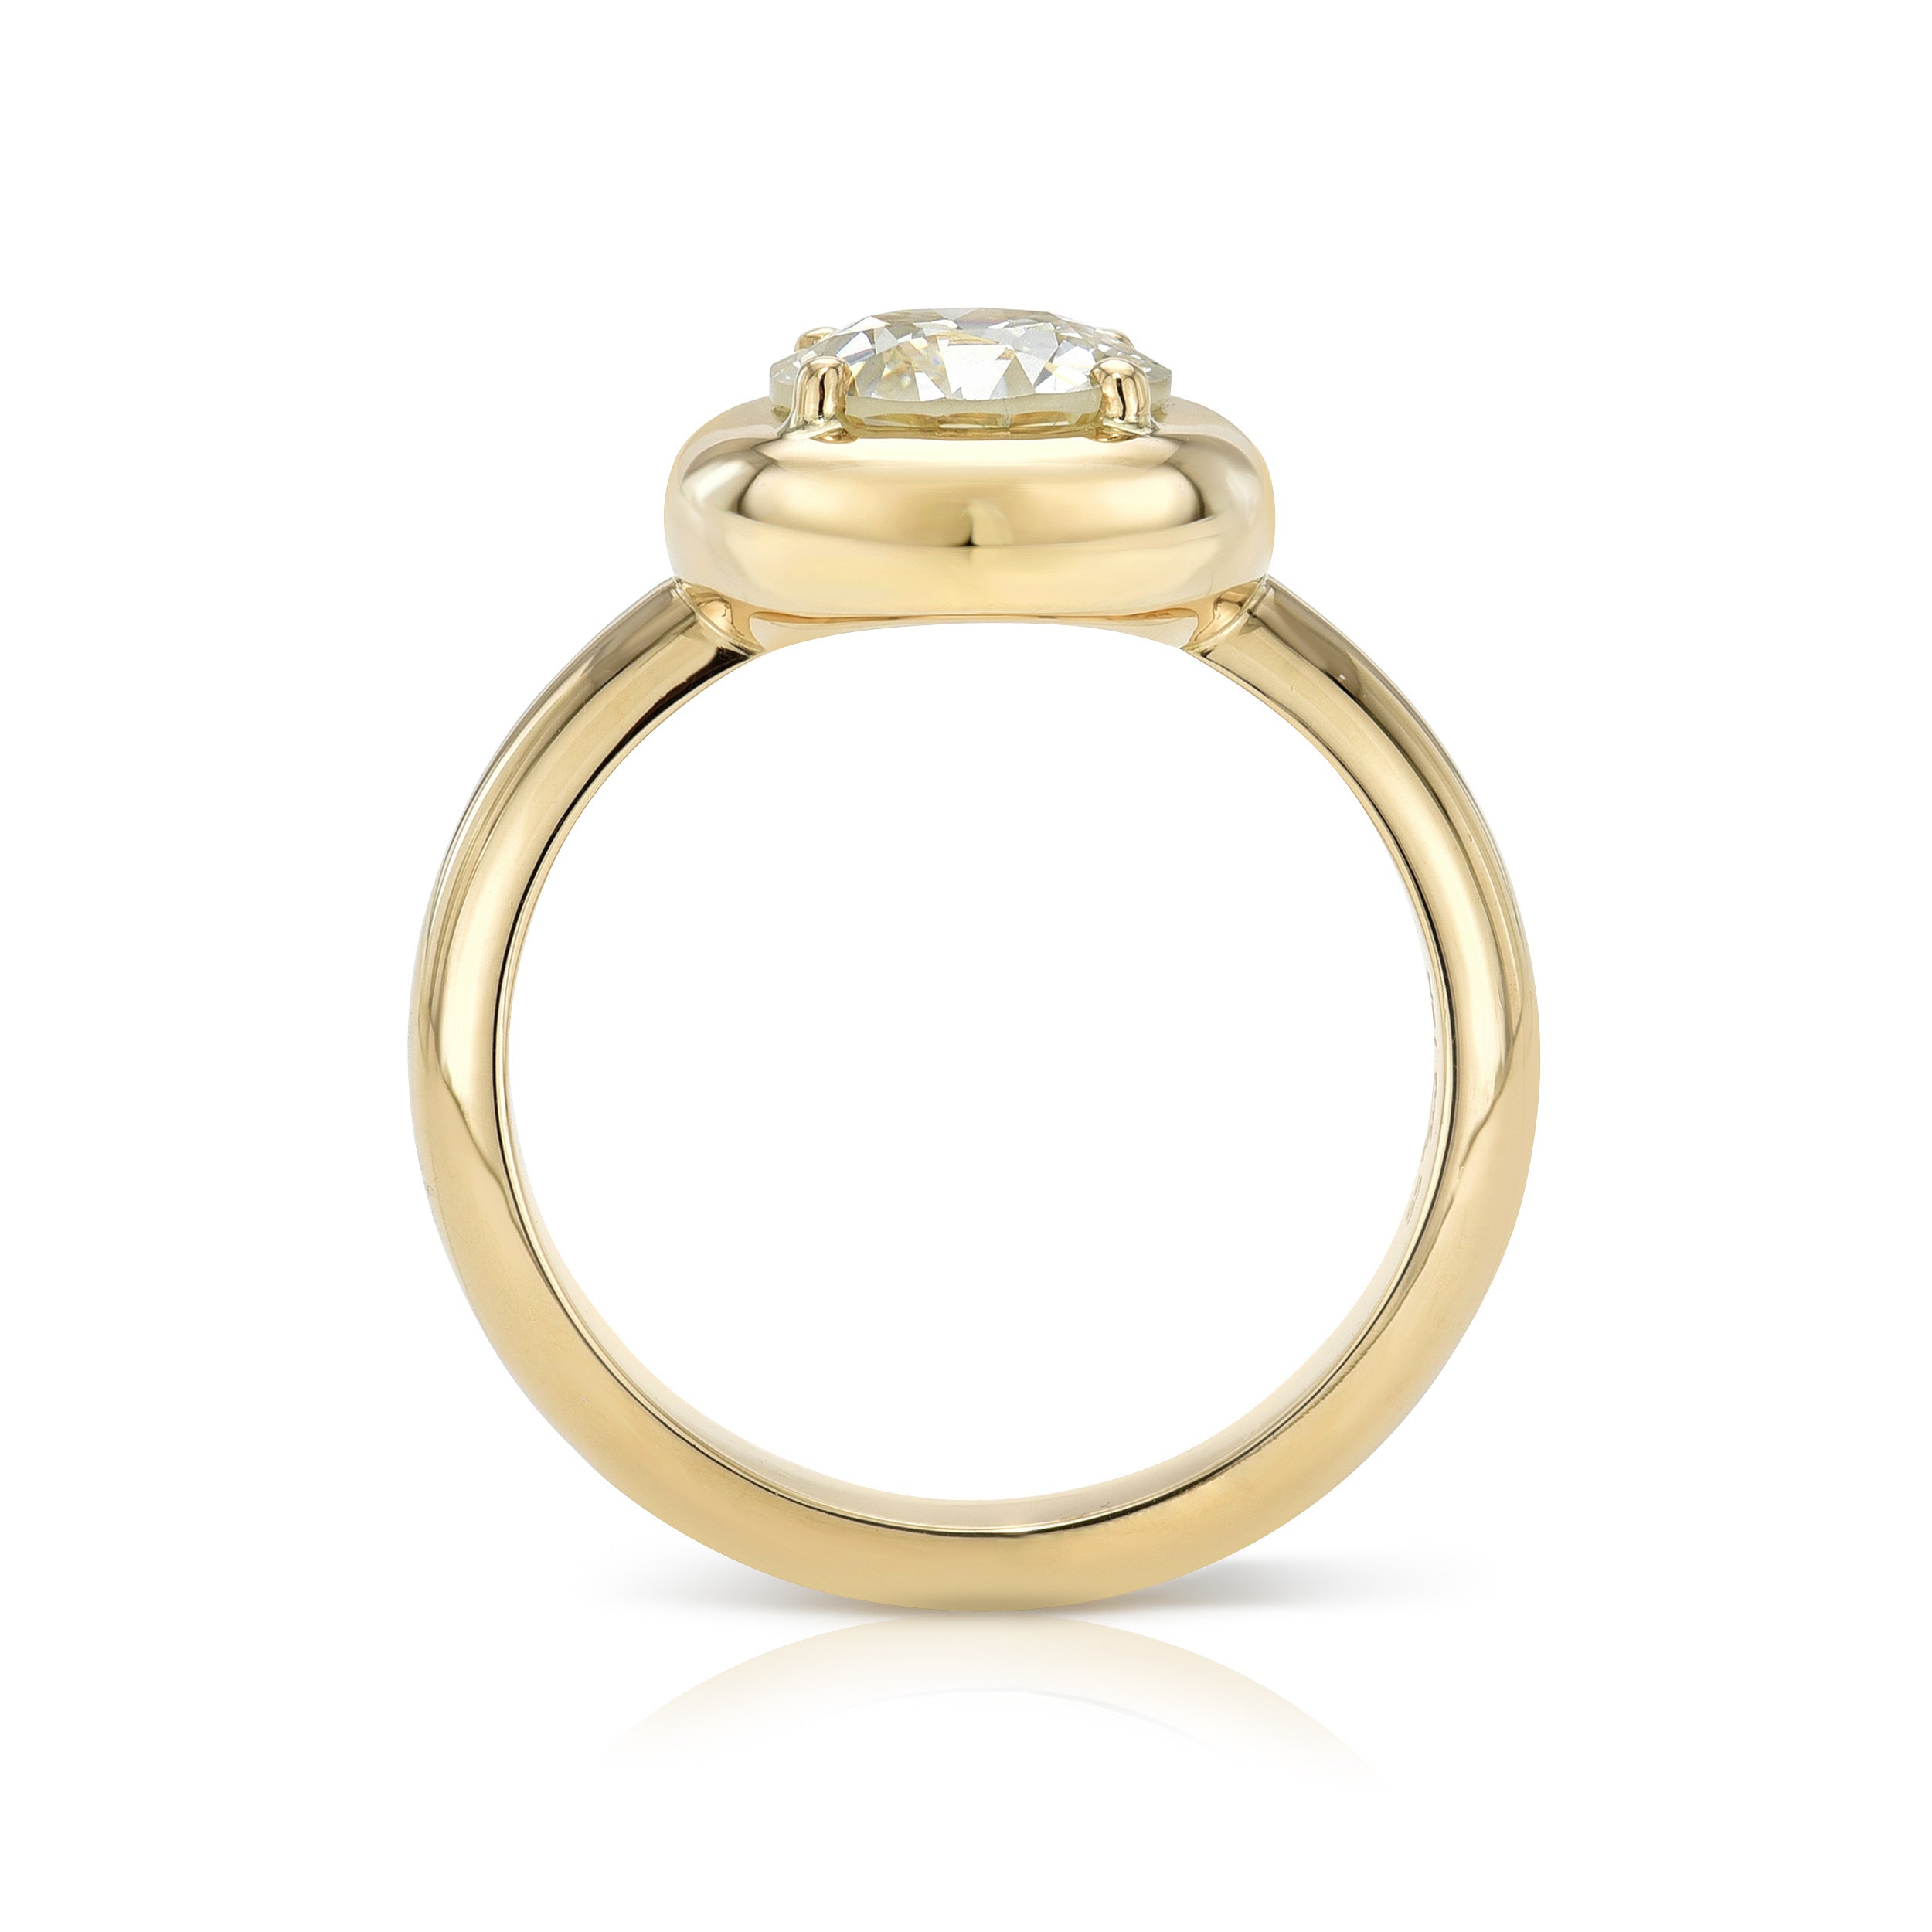 SINGLE STONE RANDI RING featuring 1.51ct M/SI1 GIA certified old European cut diamond prong set in a handcrafted 18K yellow gold mounting.